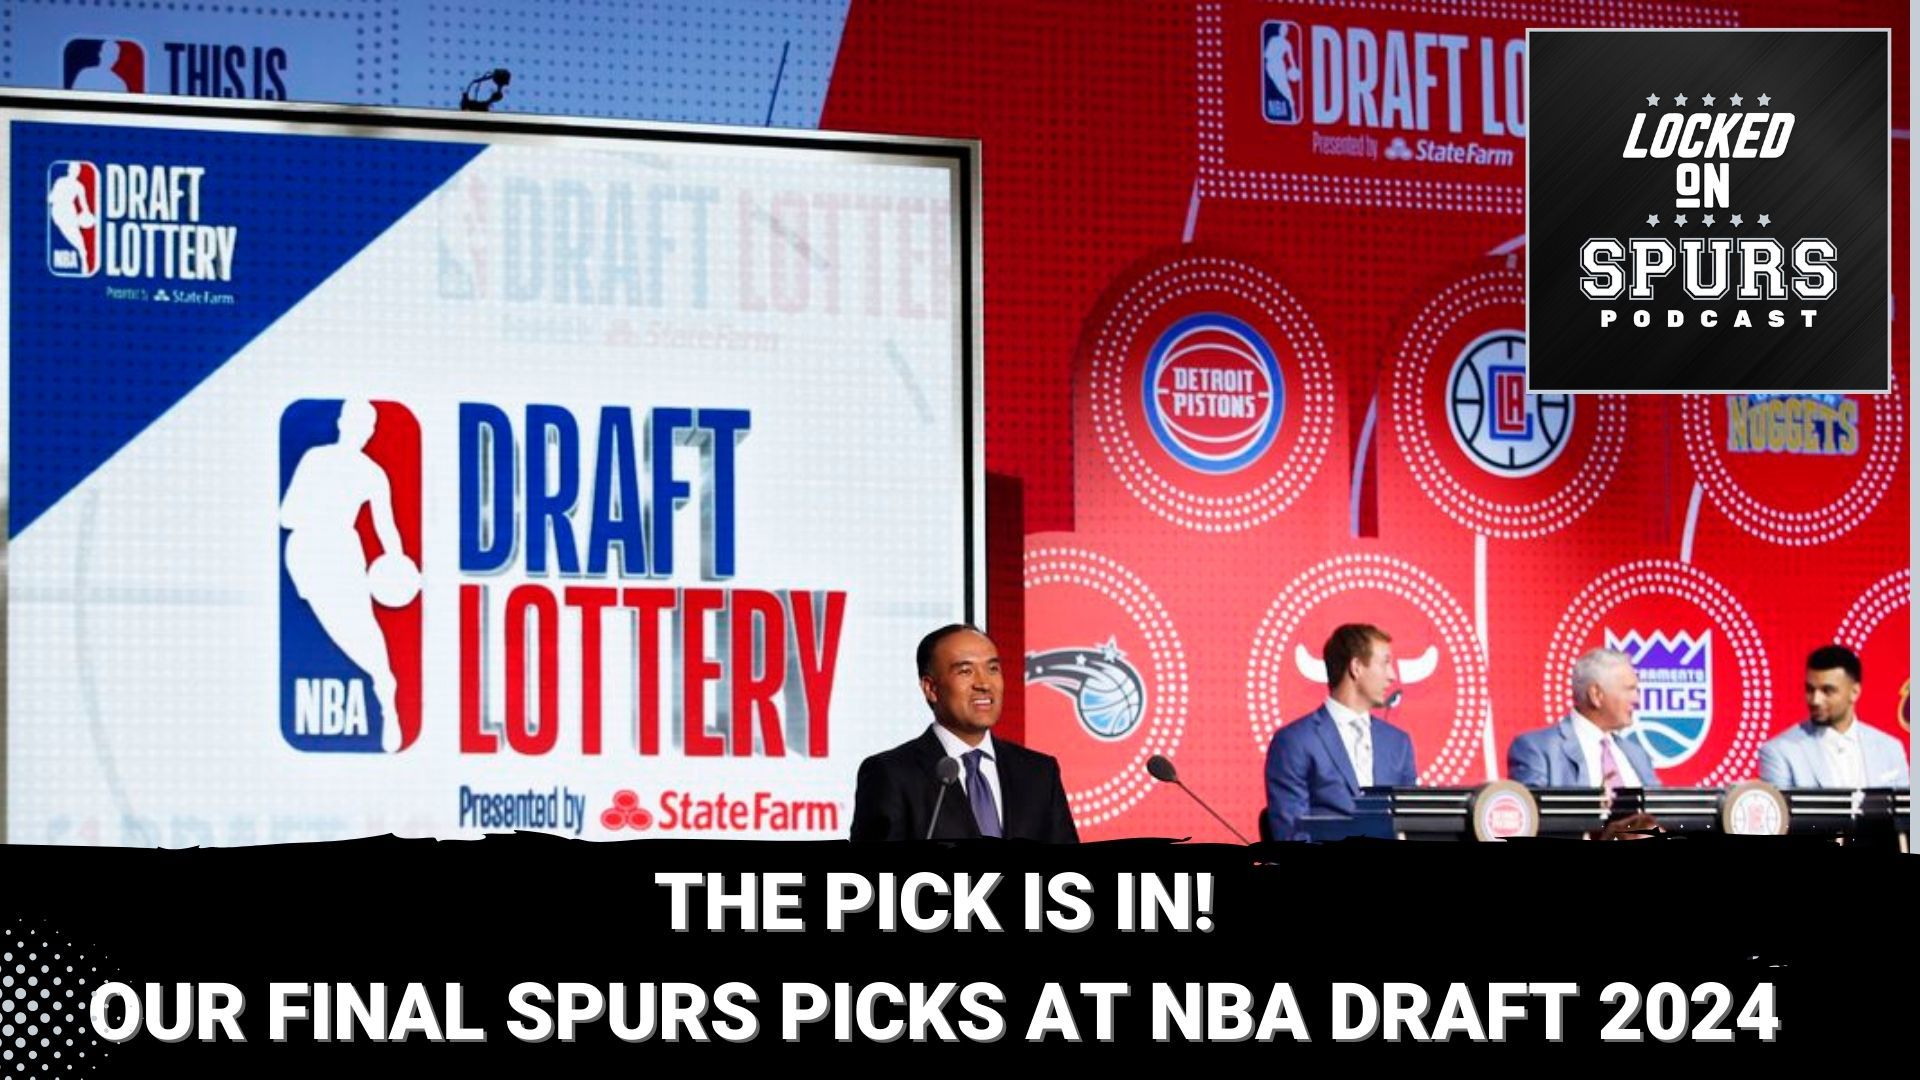 Who will the Spurs select in the 2024 NBA Draft?